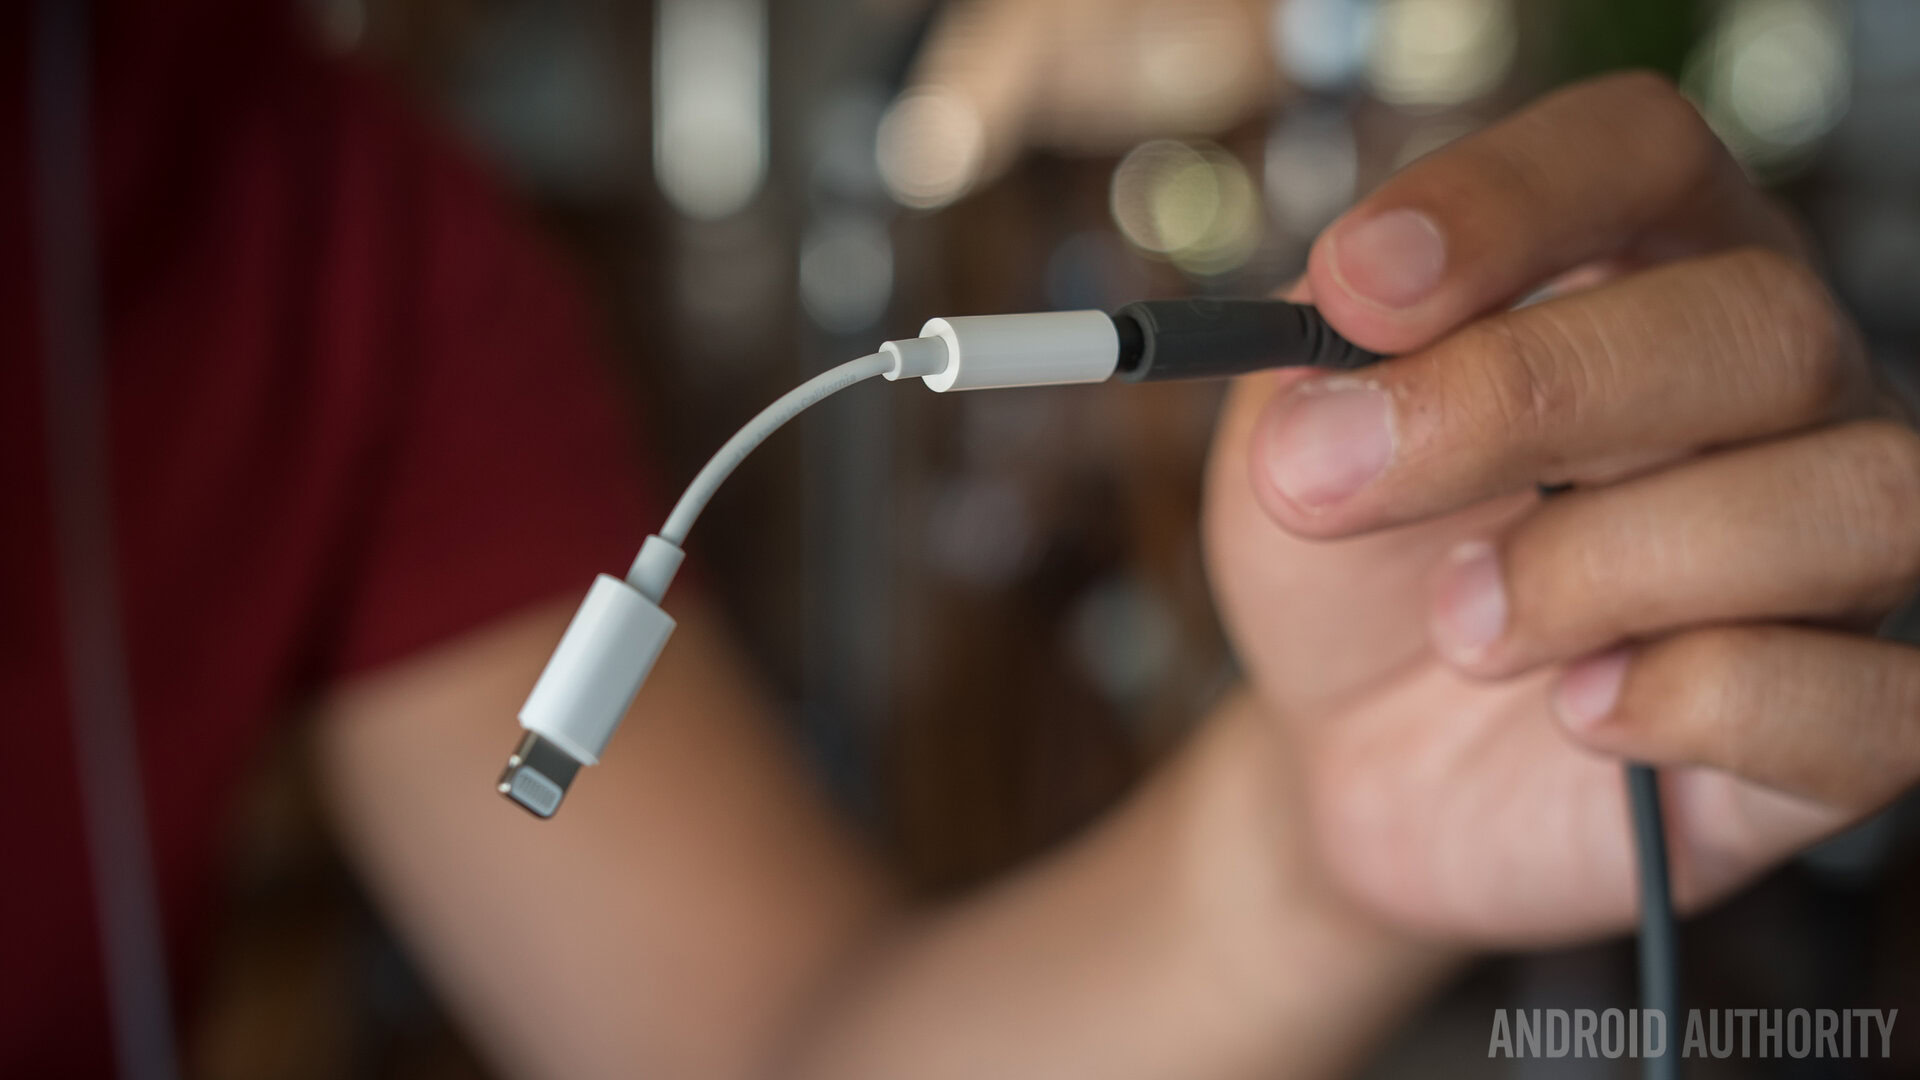 We asked, you told us: No one really wants wires, but Bluetooth just